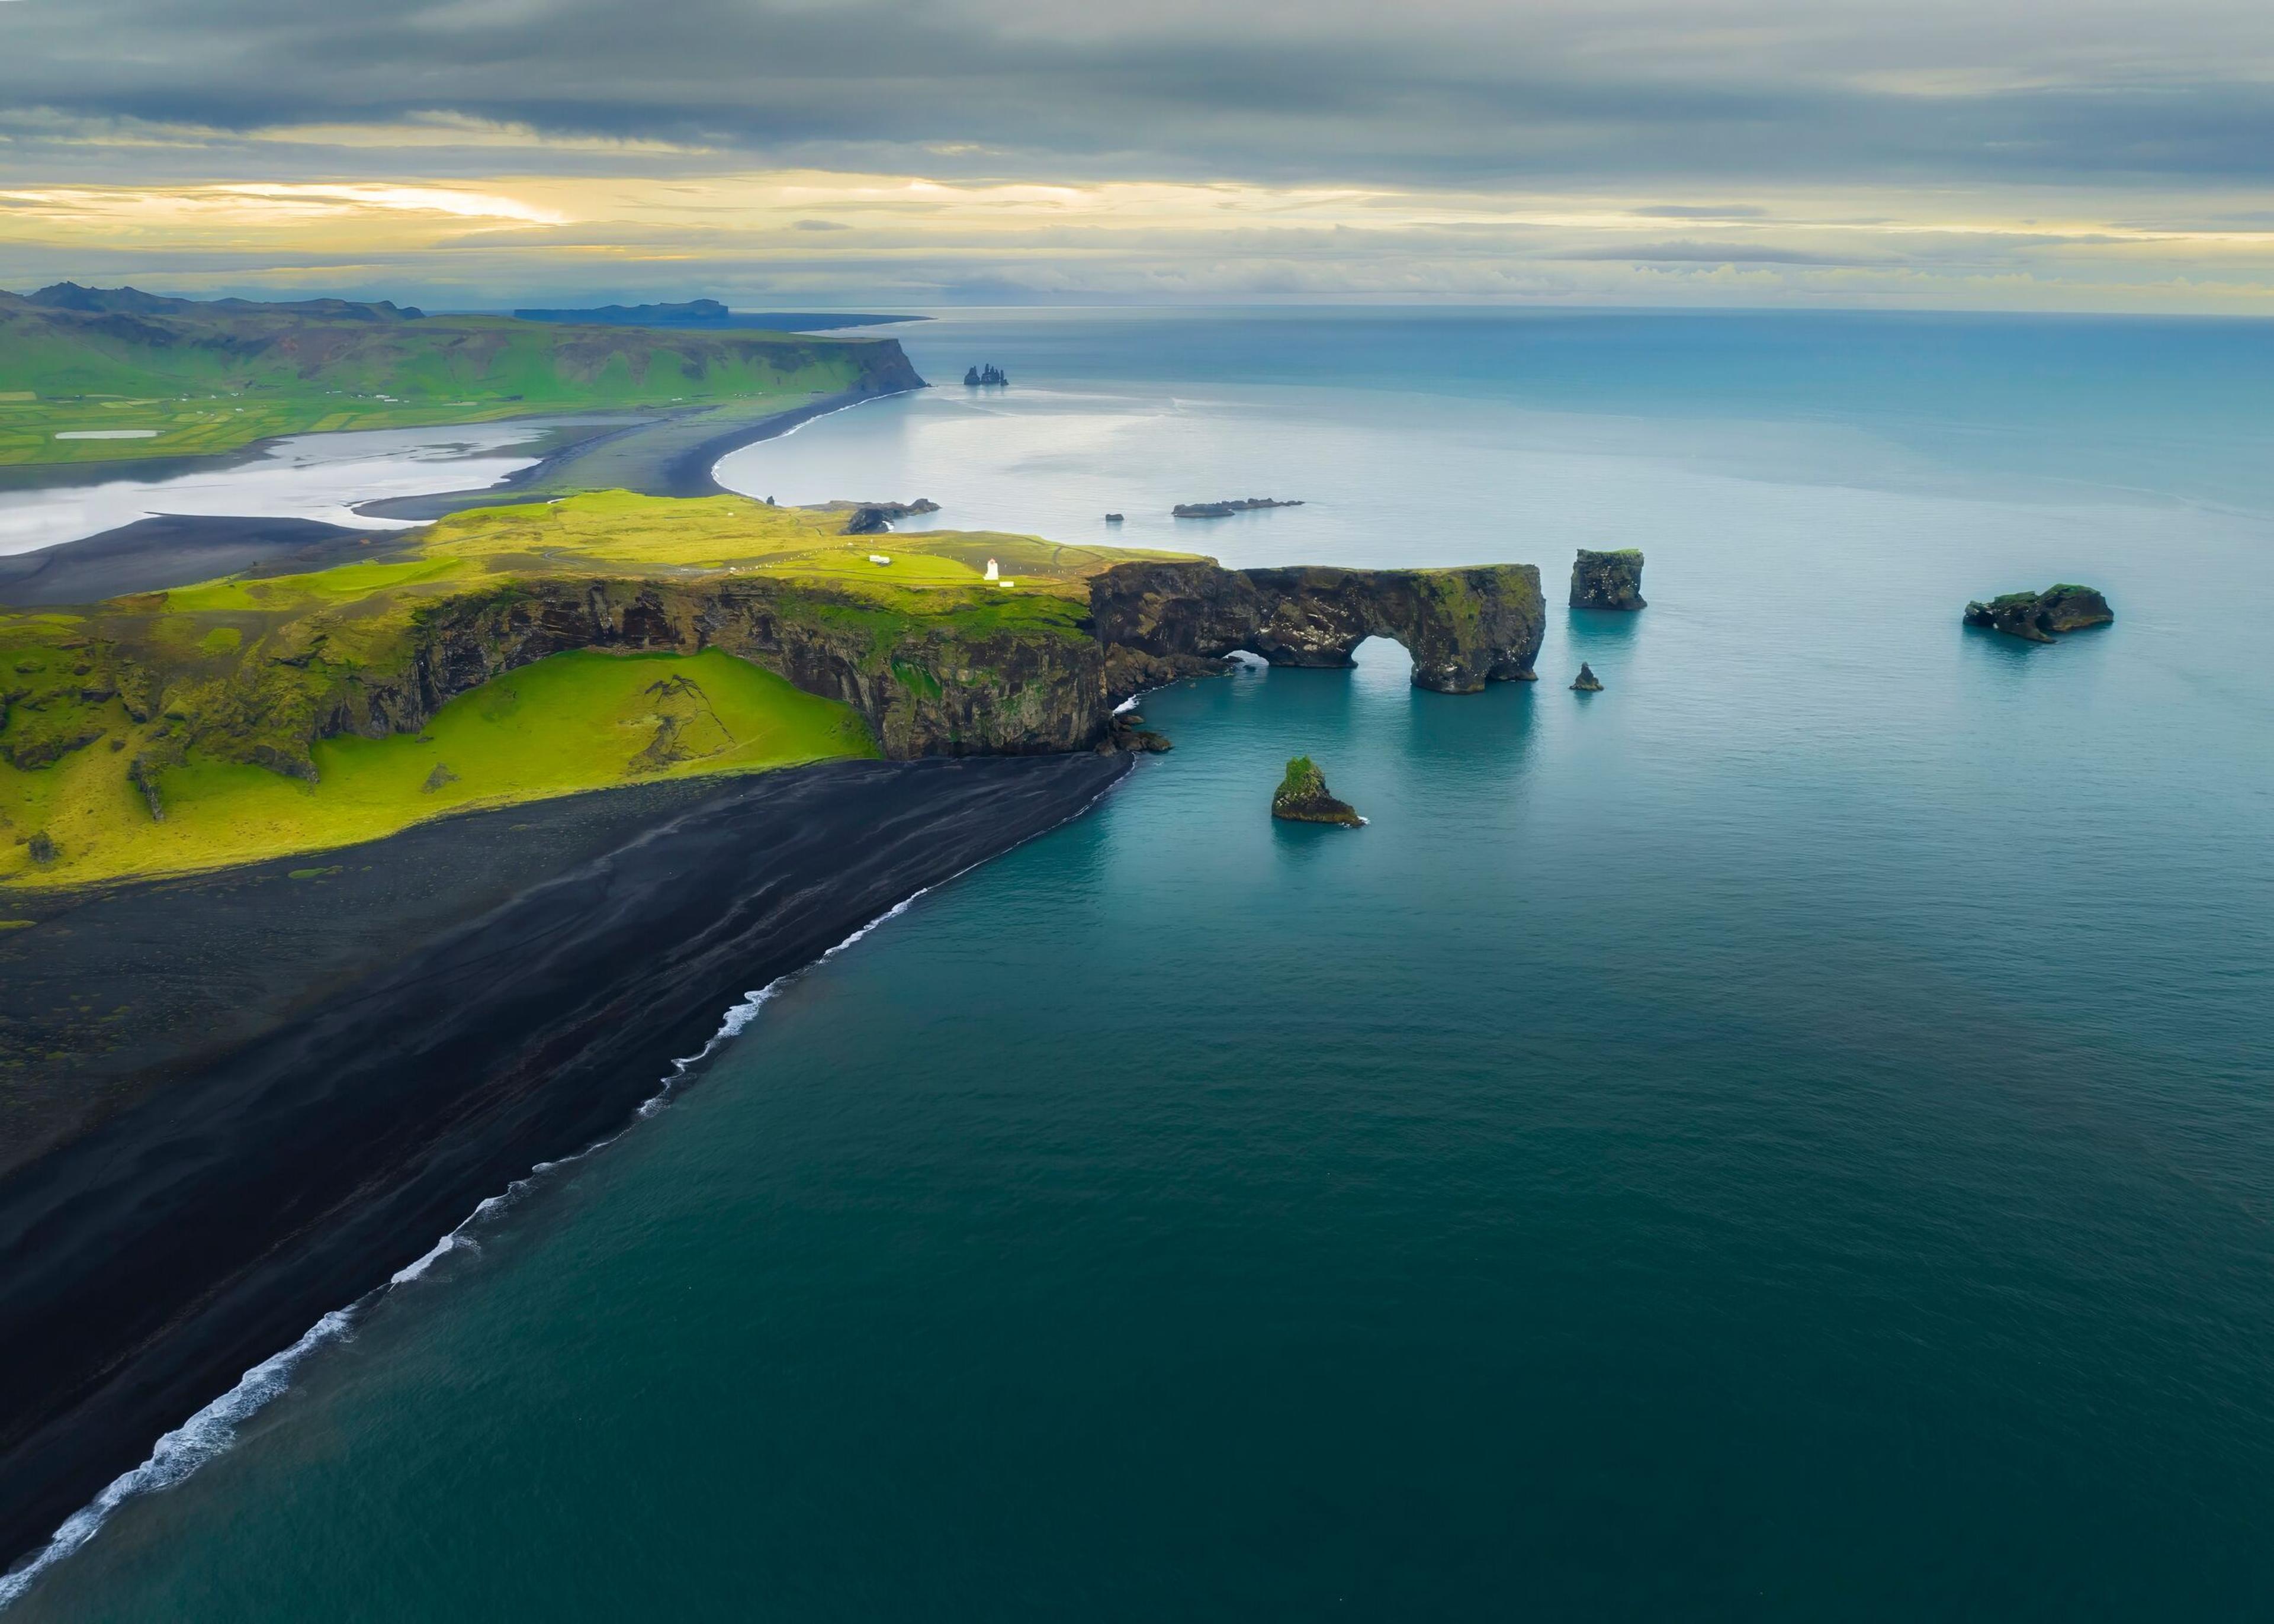 Aerial view of a dramatic coastline with black sand beaches, grassy cliffs, and rock formations jutting out from the sea under a cloudy sky.